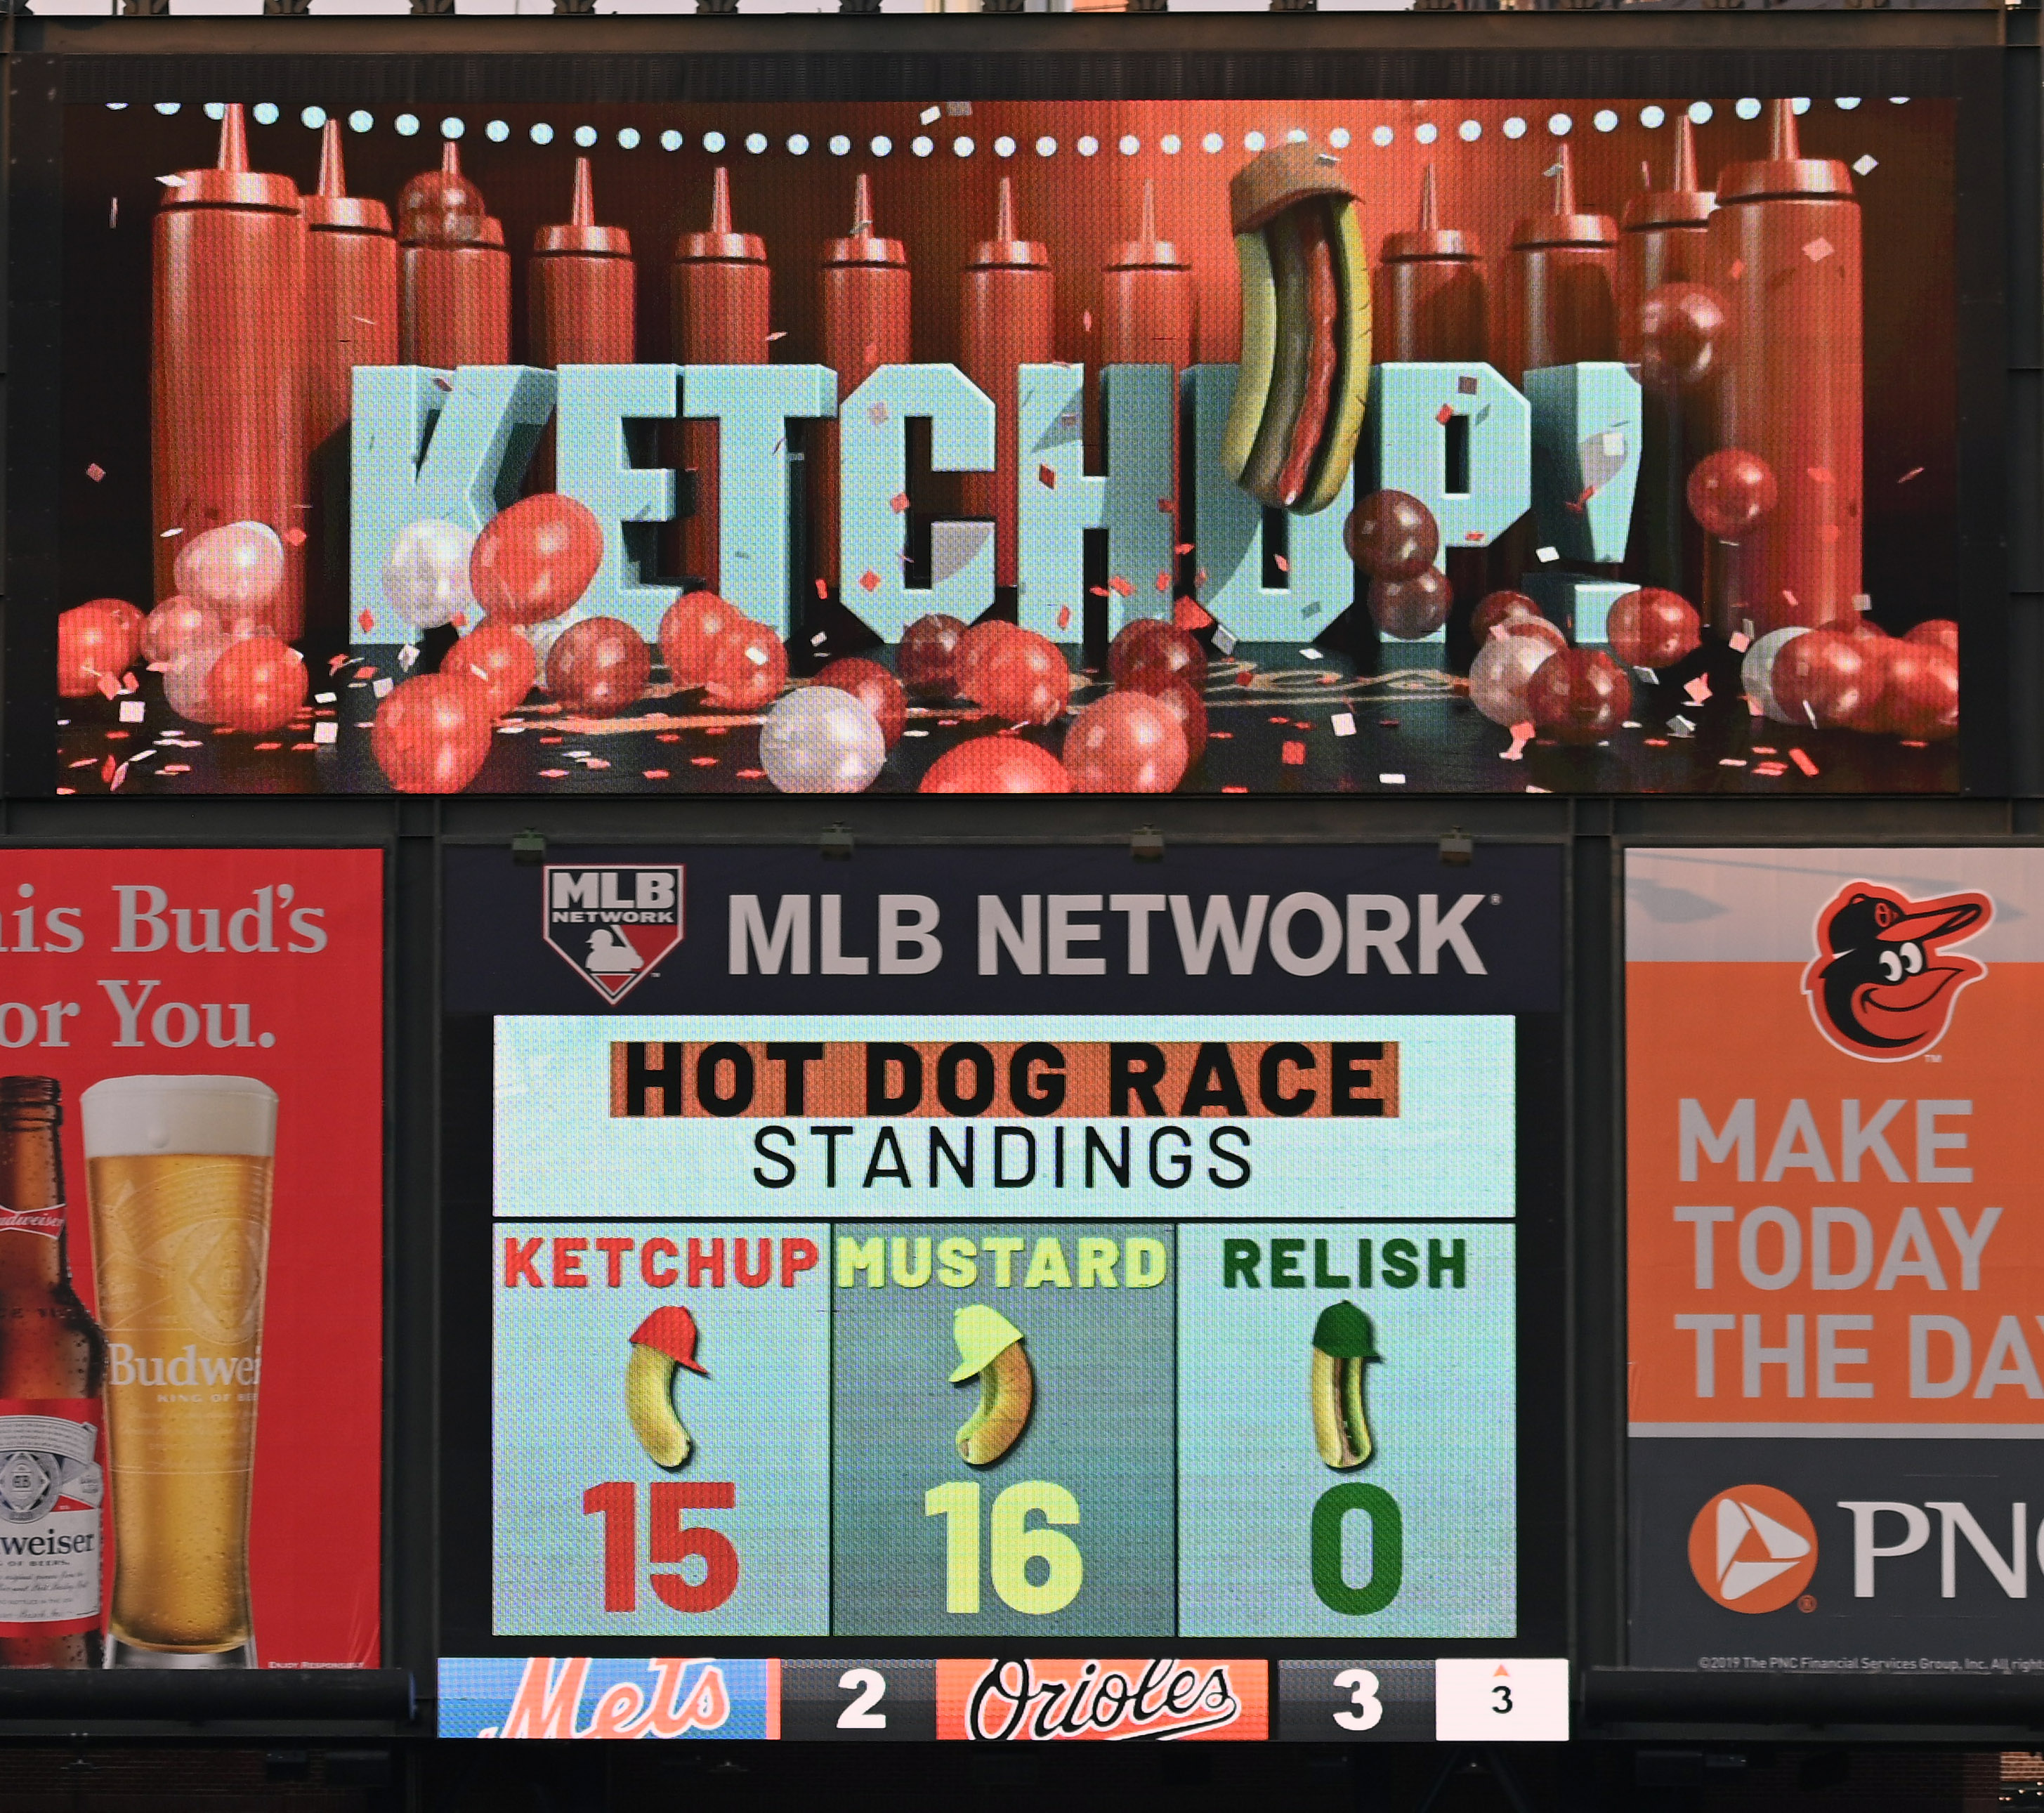 Five Orioles homestands in, Relish hasn't won a single Hot Dog Race. The  team says there's still time to catch up.